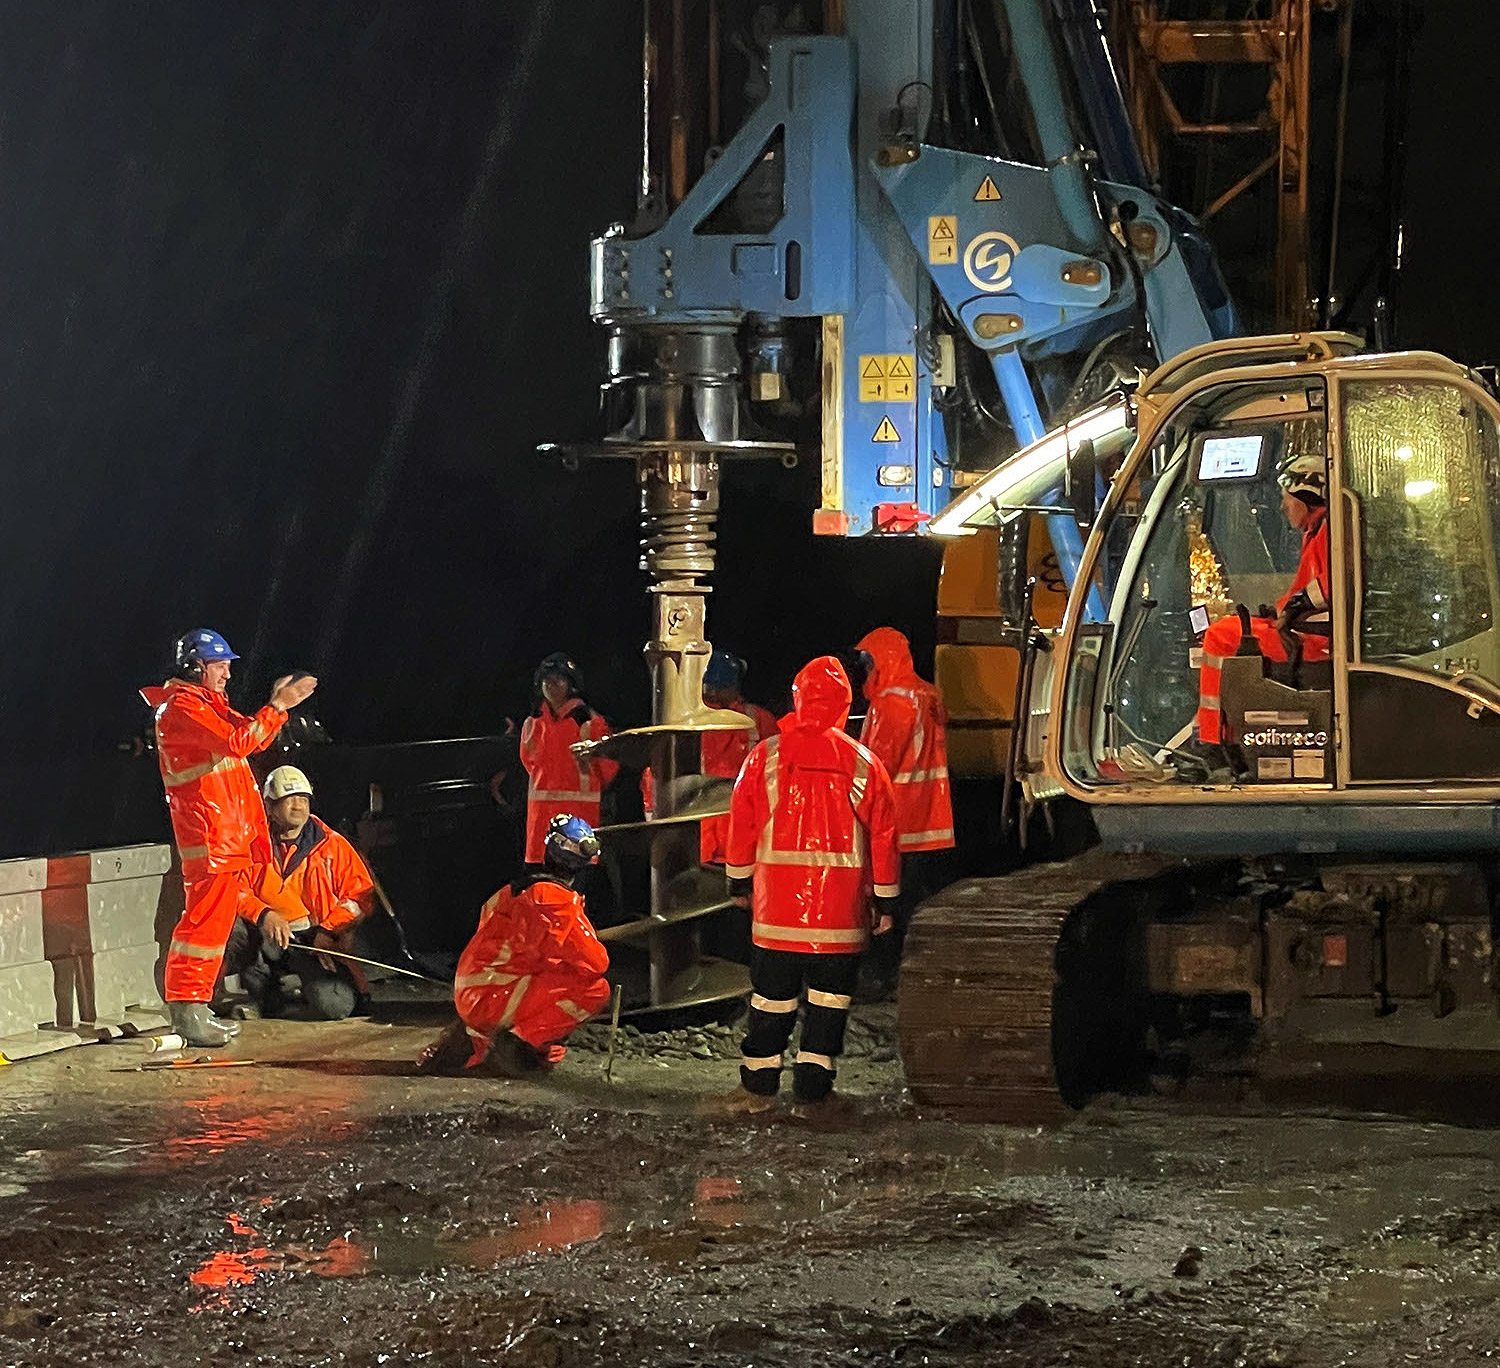 Spiral Drillers workers at night drilling a hole with an excavator